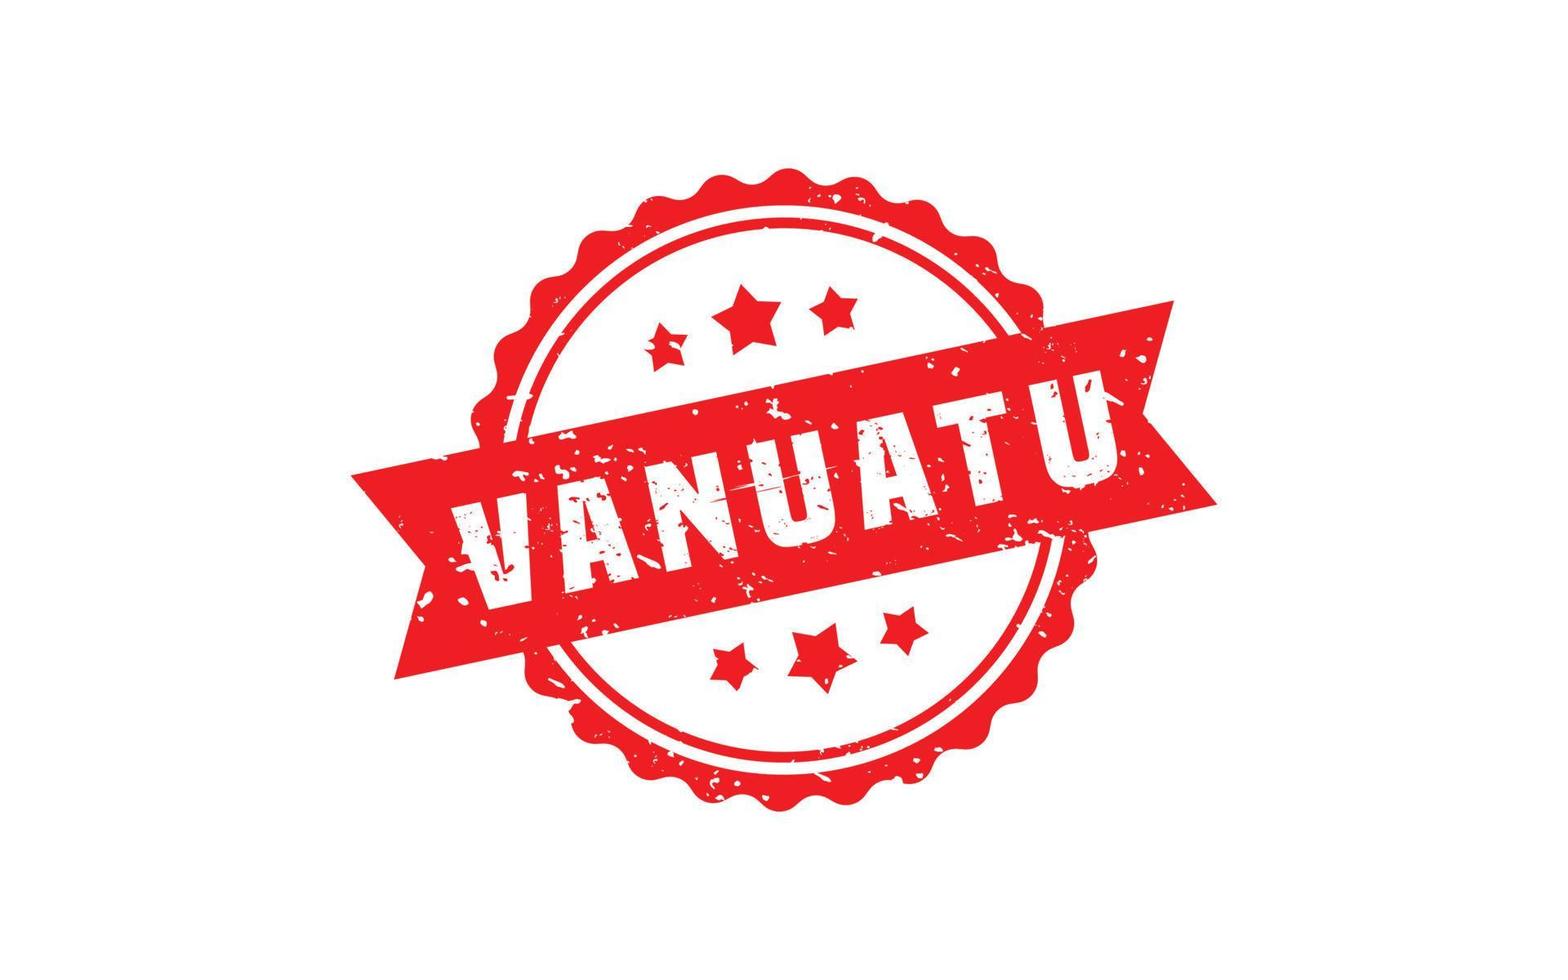 VANUATU stamp rubber with grunge style on white background vector